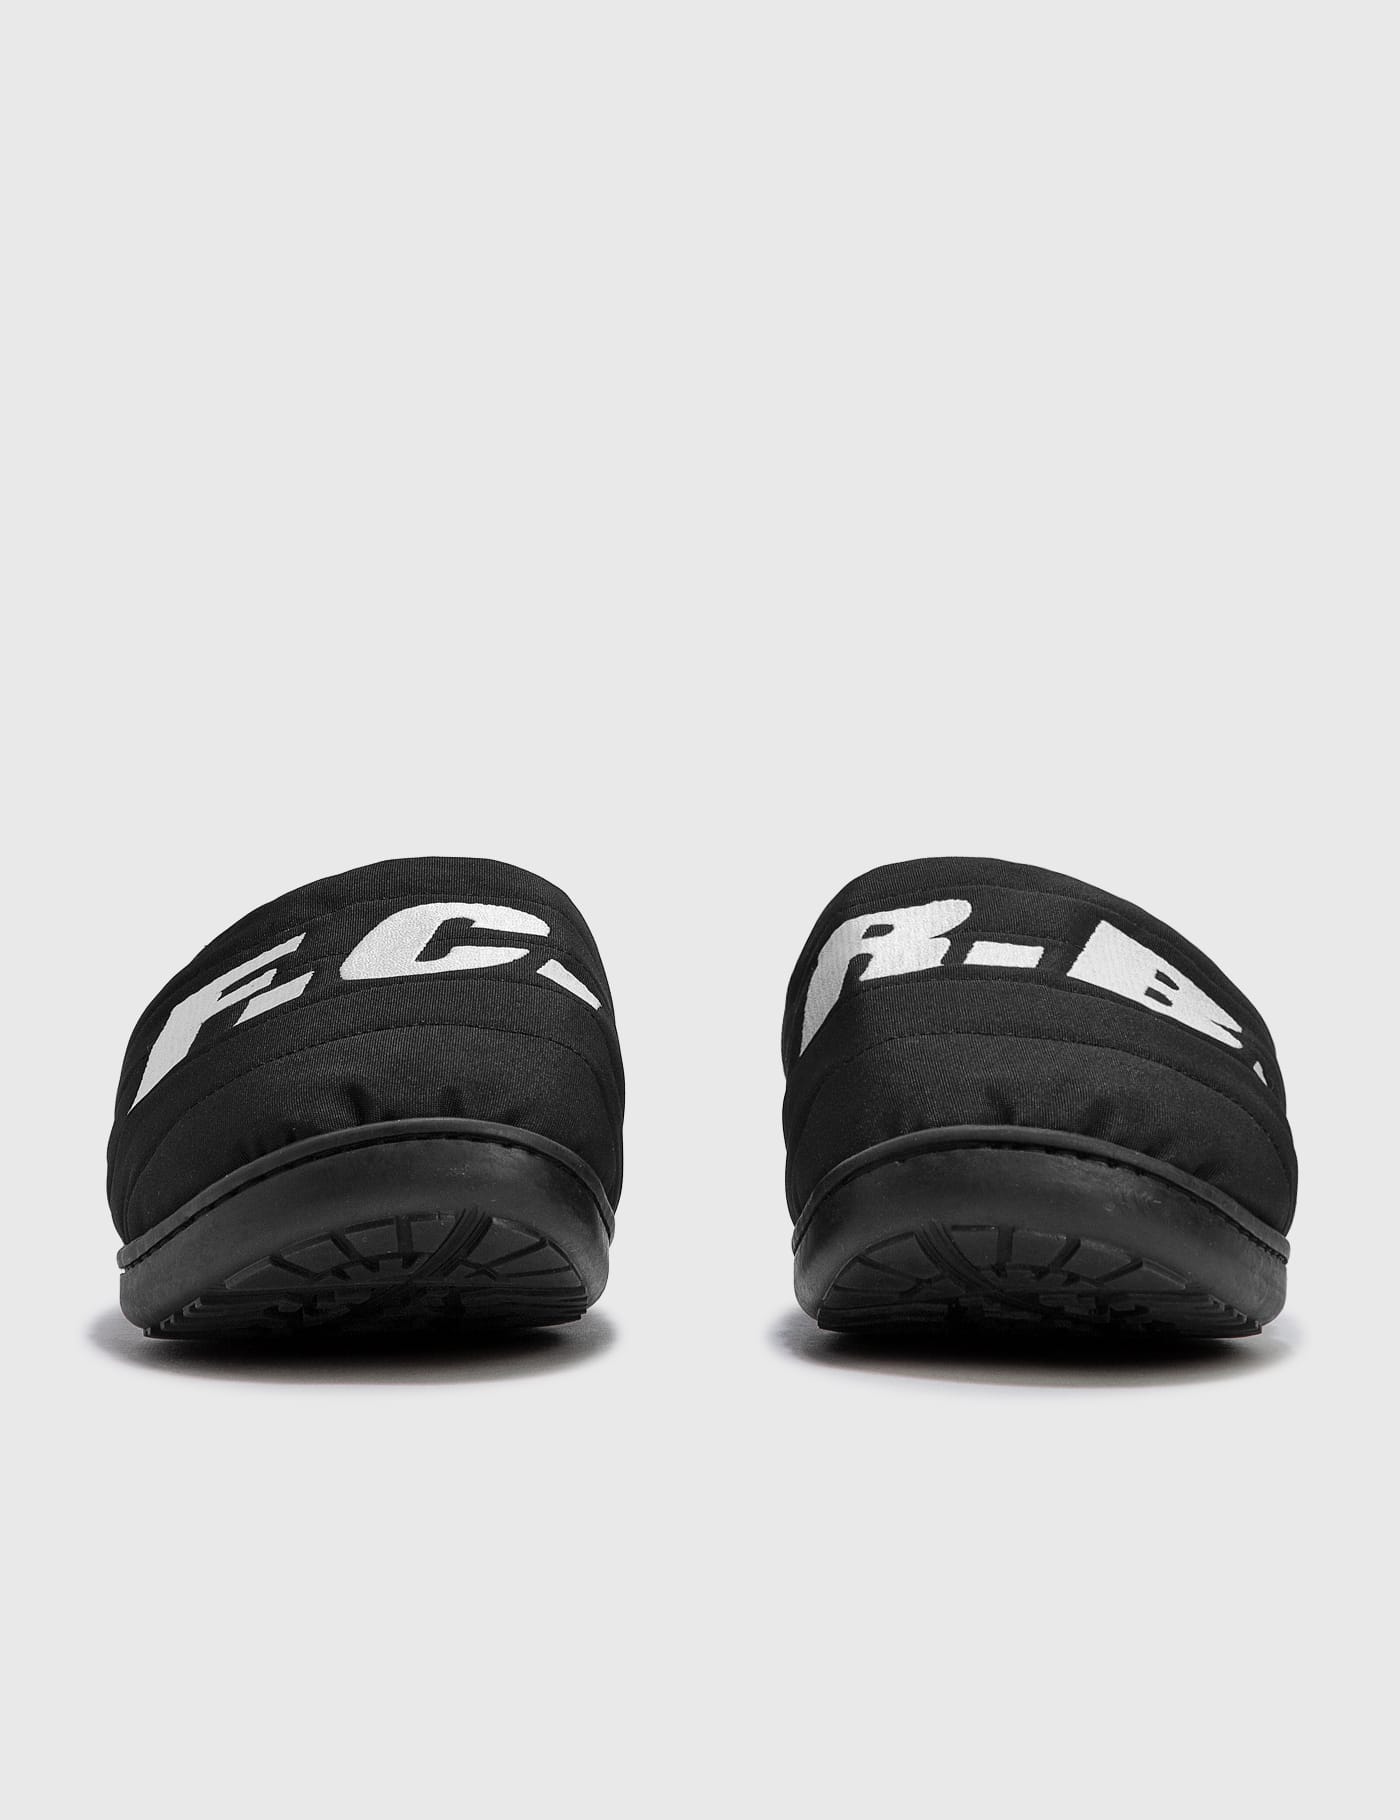 F.C. Real Bristol - SUBU x FCRB SANDALS | HBX - Globally Curated